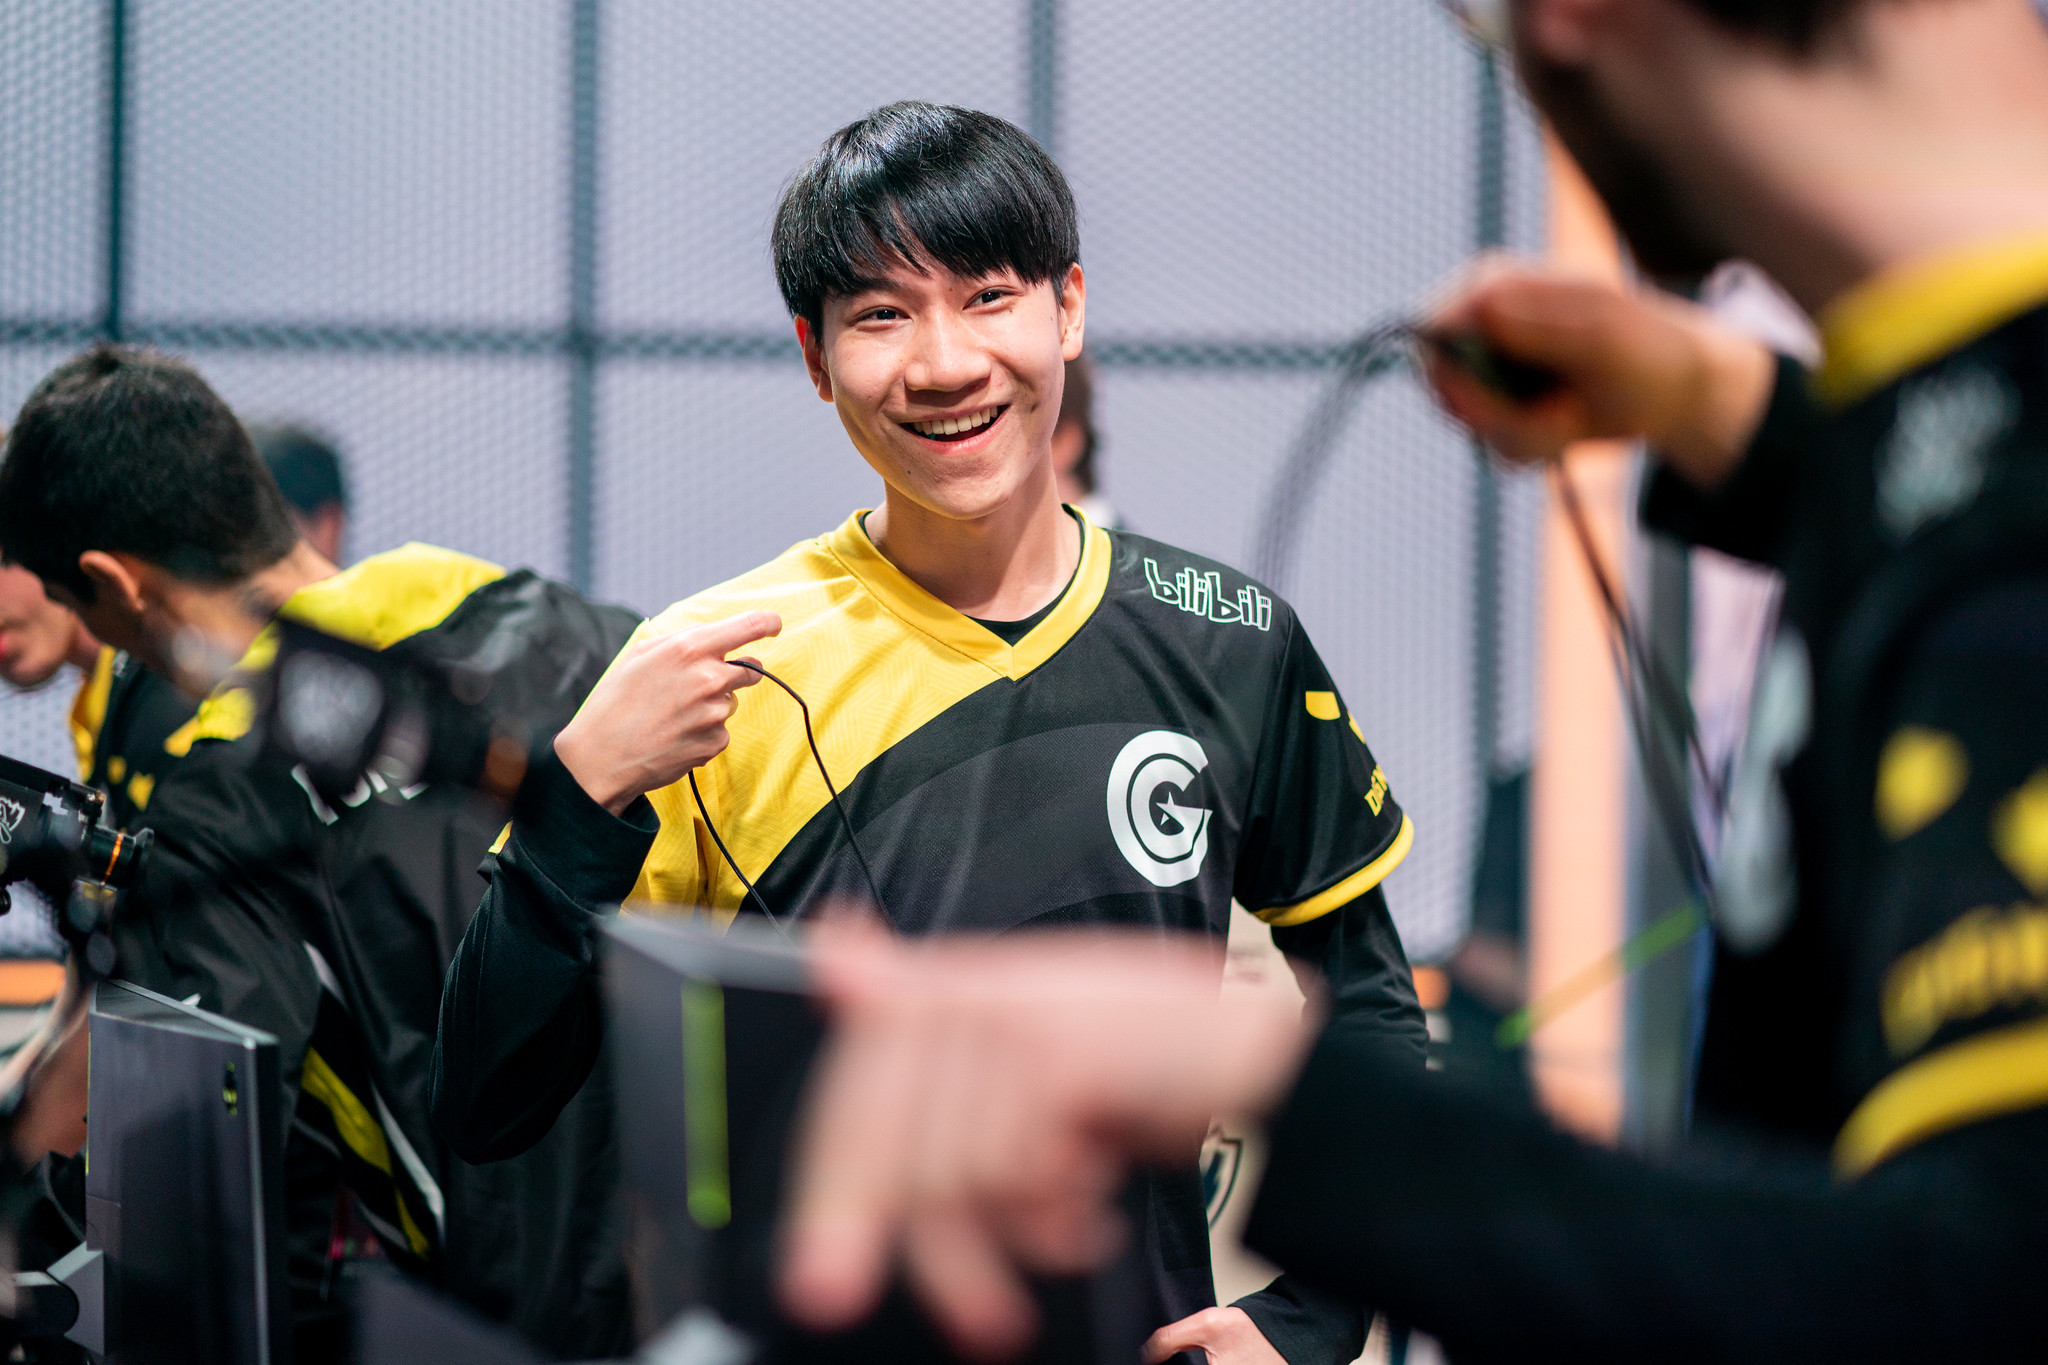 What to expect from Clutch Gaming at Worlds 2019 - Dot Esports